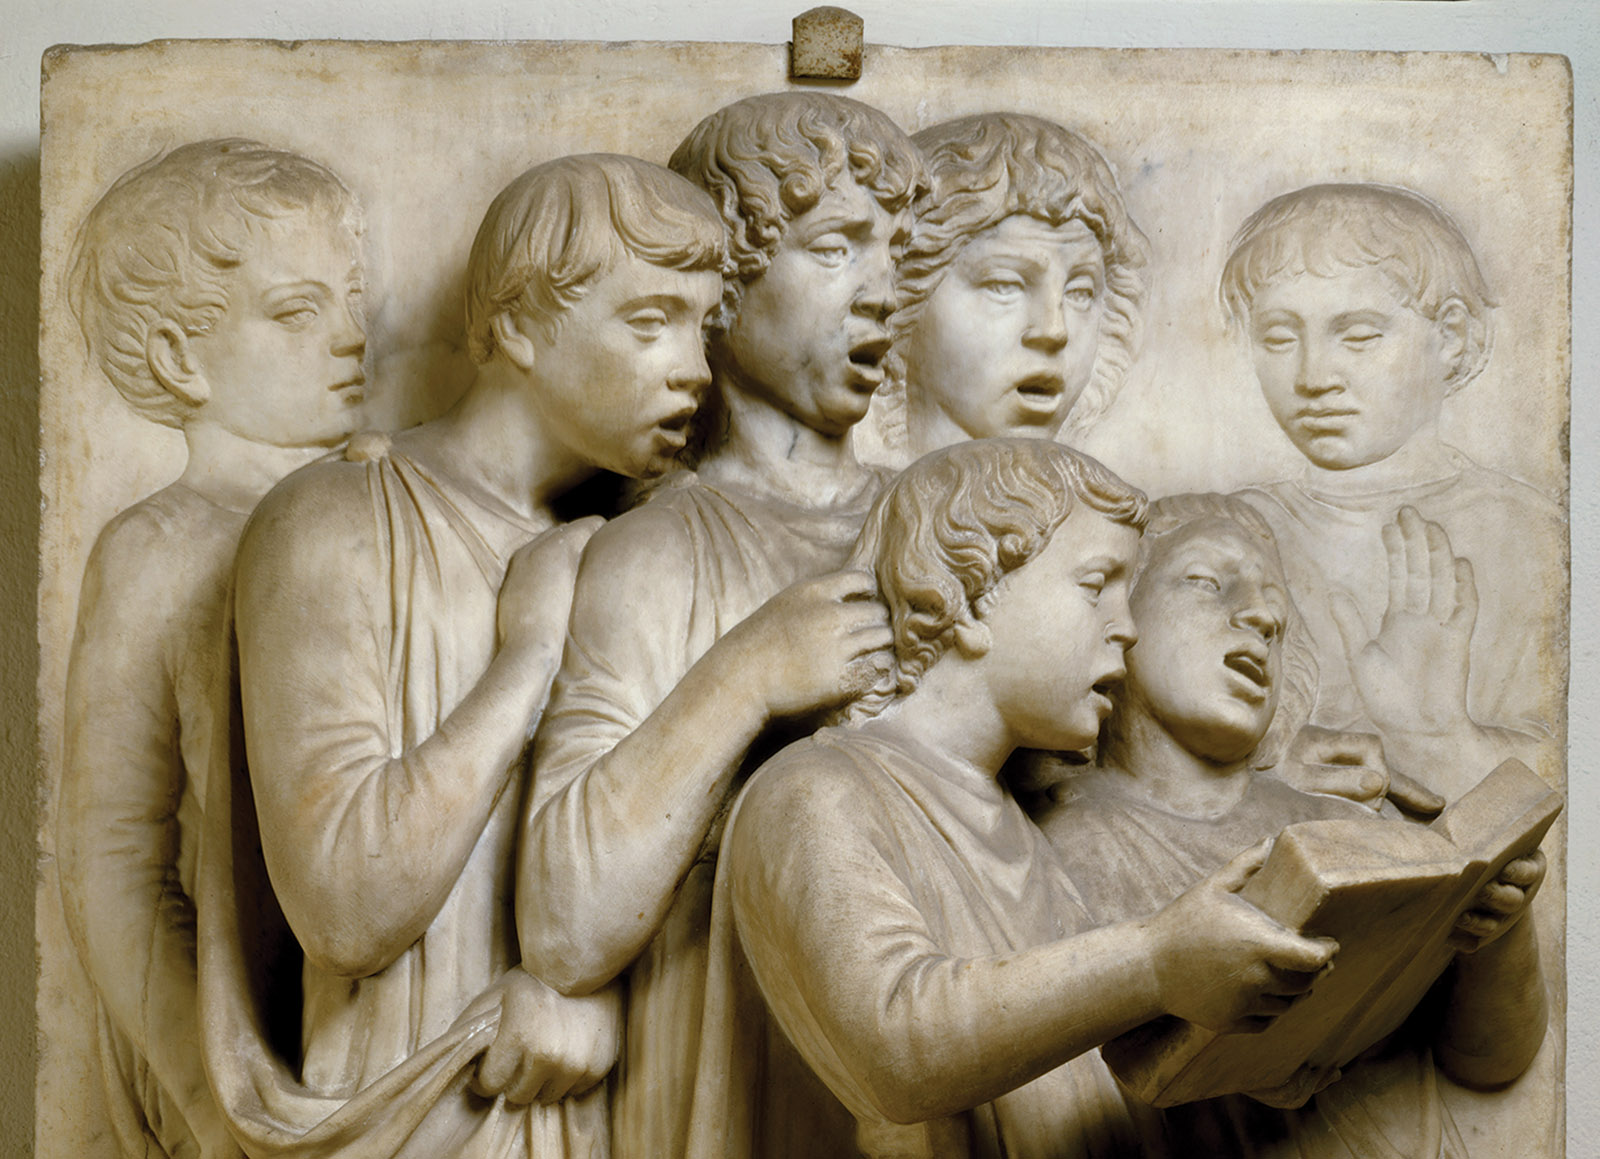 Luca della Robbia the Elder: detail from the Cantoria (choir loft), in the Museo dell’Opera del Duomo, Florence, Italy, 1431–1438